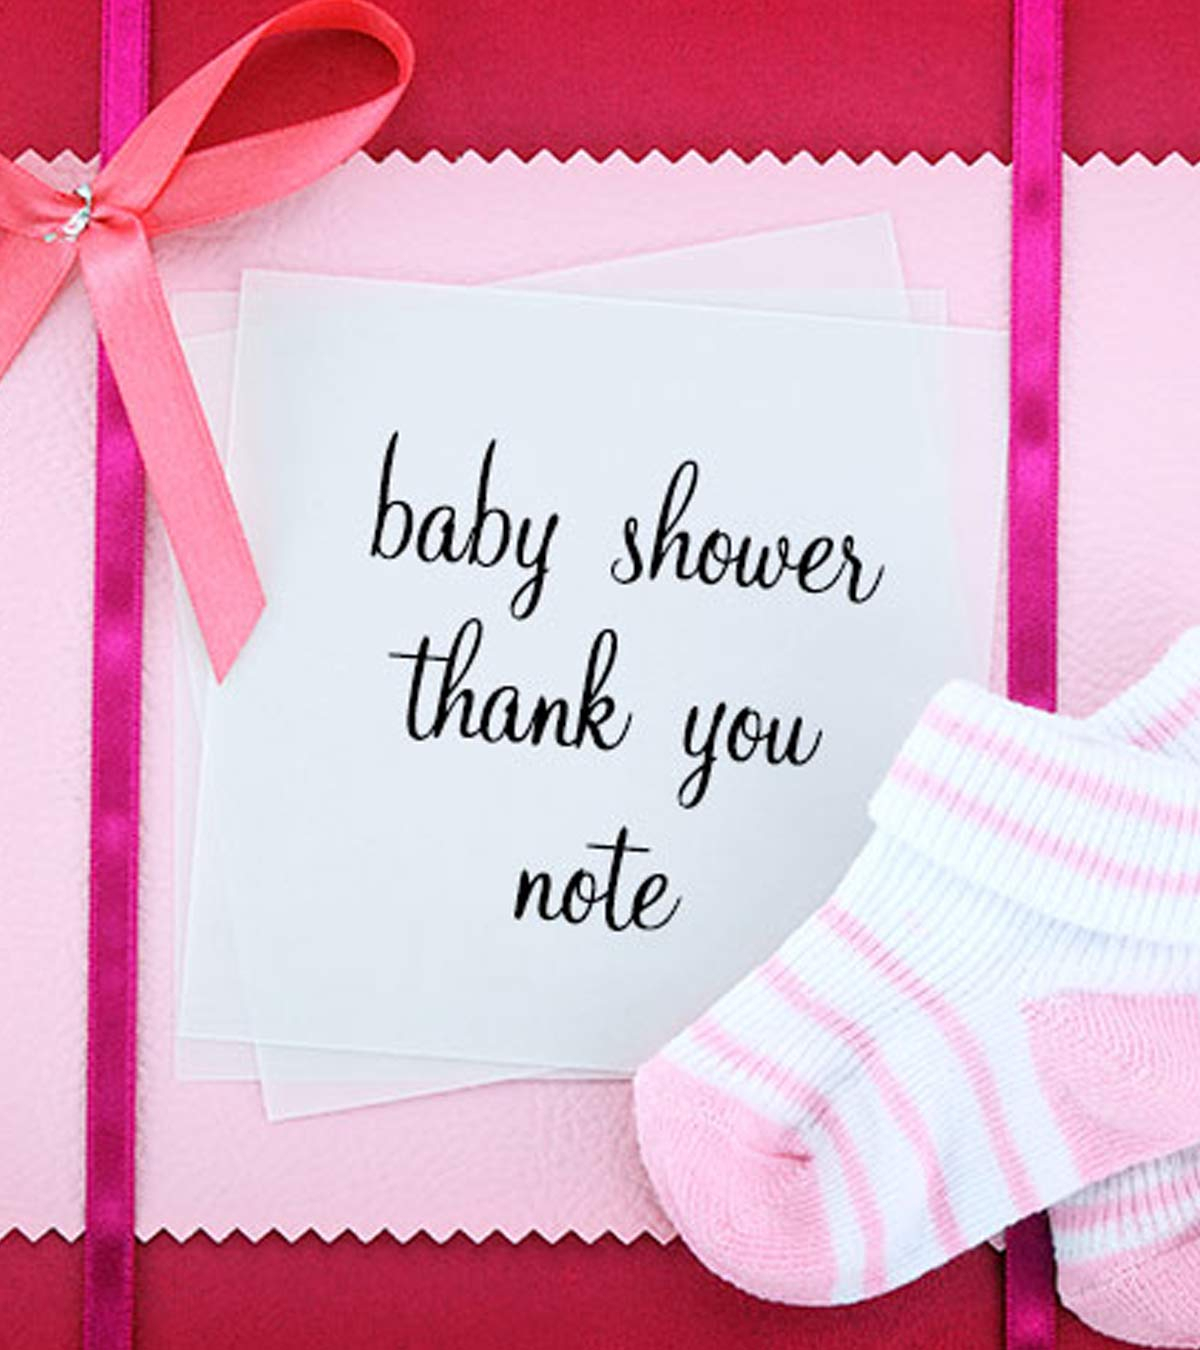 Baby Shower Thank You Notes: How To Write And What To Write For Thank You Card Template For Baby Shower